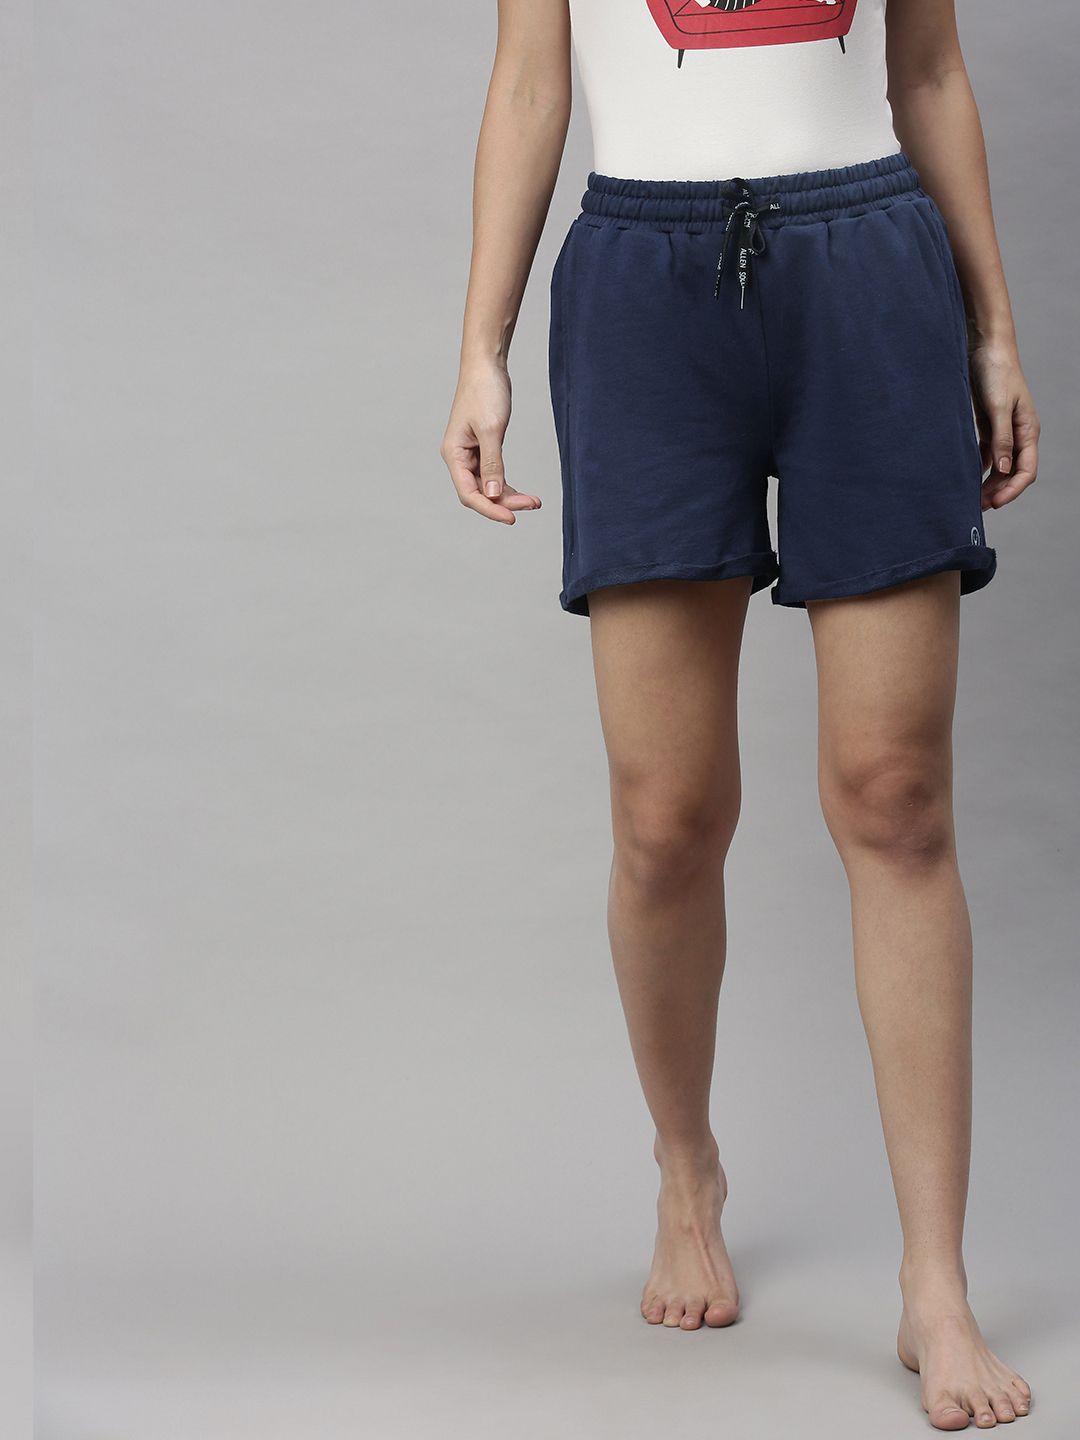 allen-solly-woman-navy-blue-solid-pure-cotton-lounge-shorts